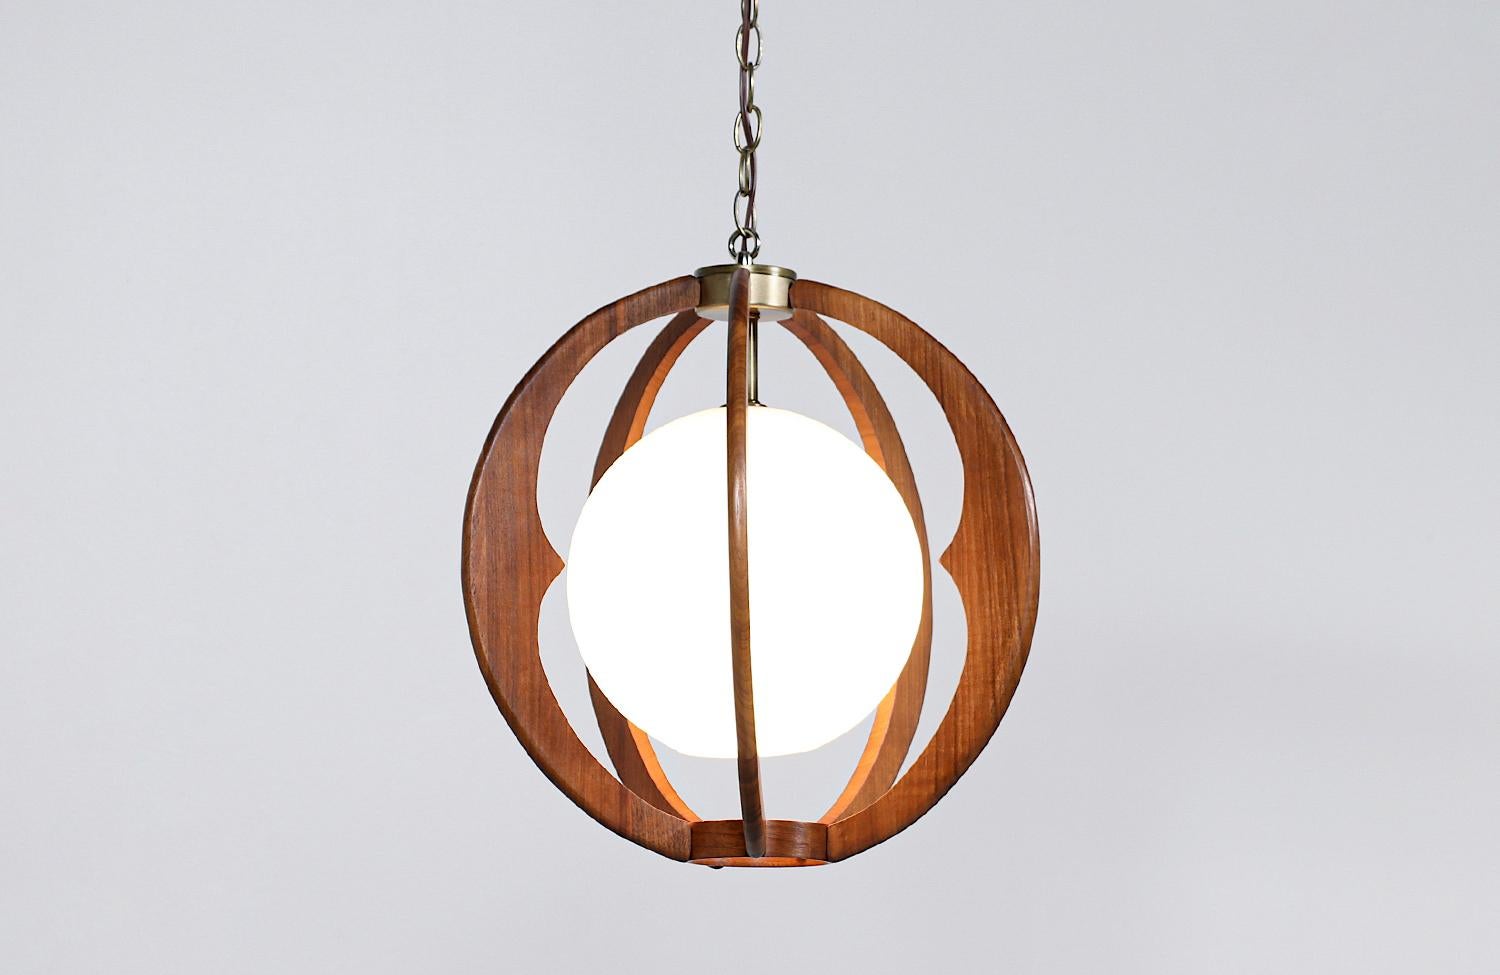 Modern globe pendant chandelier designed and manufactured in the United States circa 1960’s. This delicate chandelier features a white glass shade enclosed in a spherical walnut wood frame with brass accents. This beautiful design is subtle yet